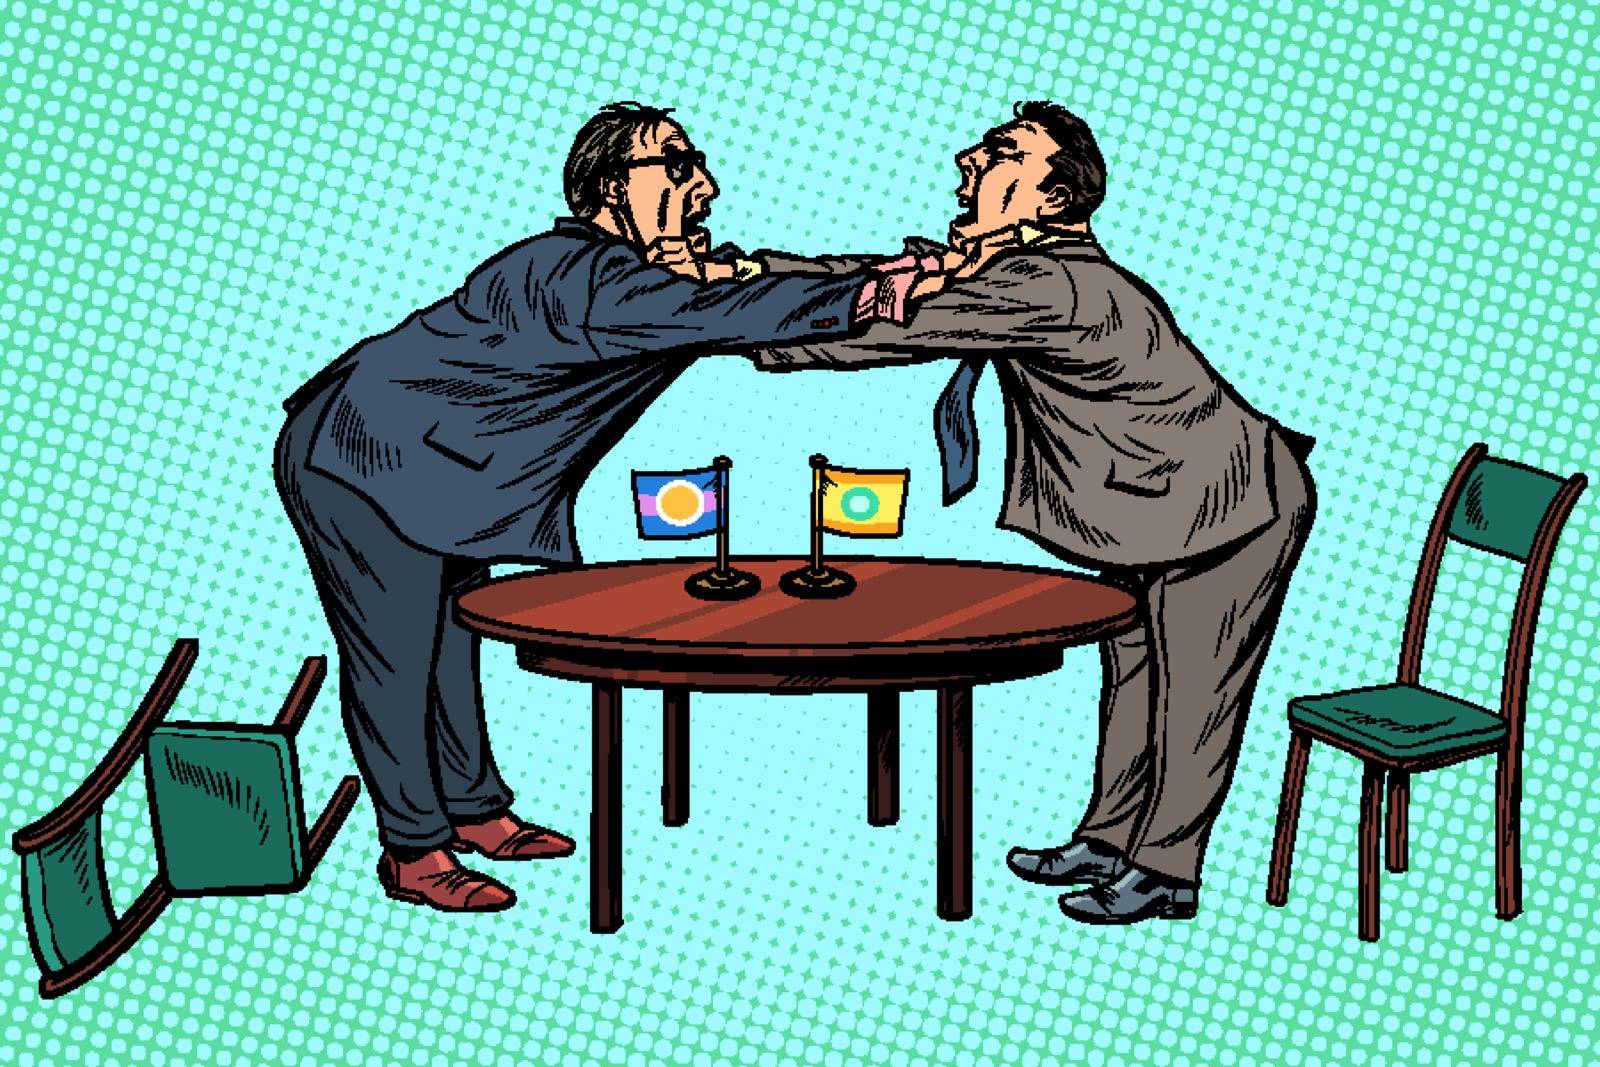 policy diplomacy and negotiations. Fight opponents. Pop art retro vector illustration drawing